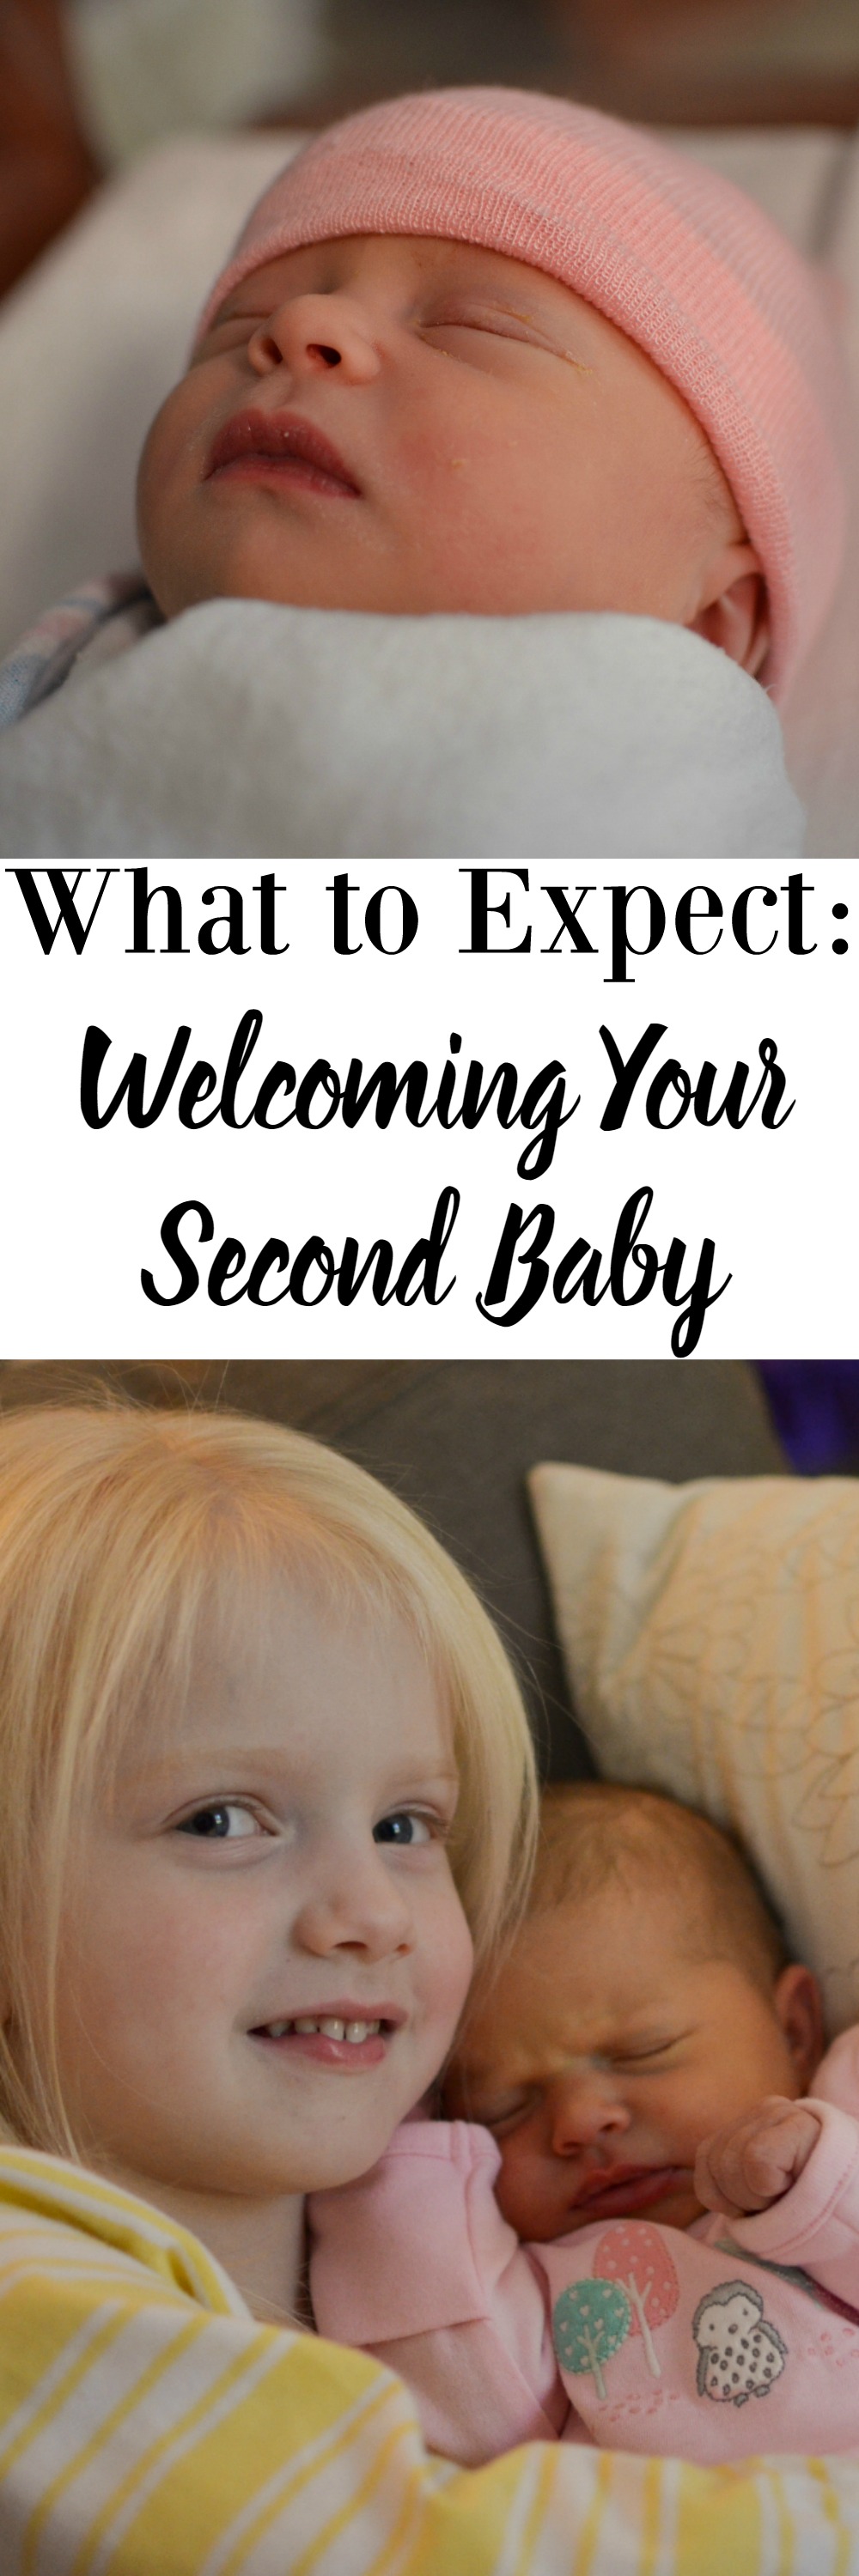 what-to-expect-when-welcoming-your-second-baby-2